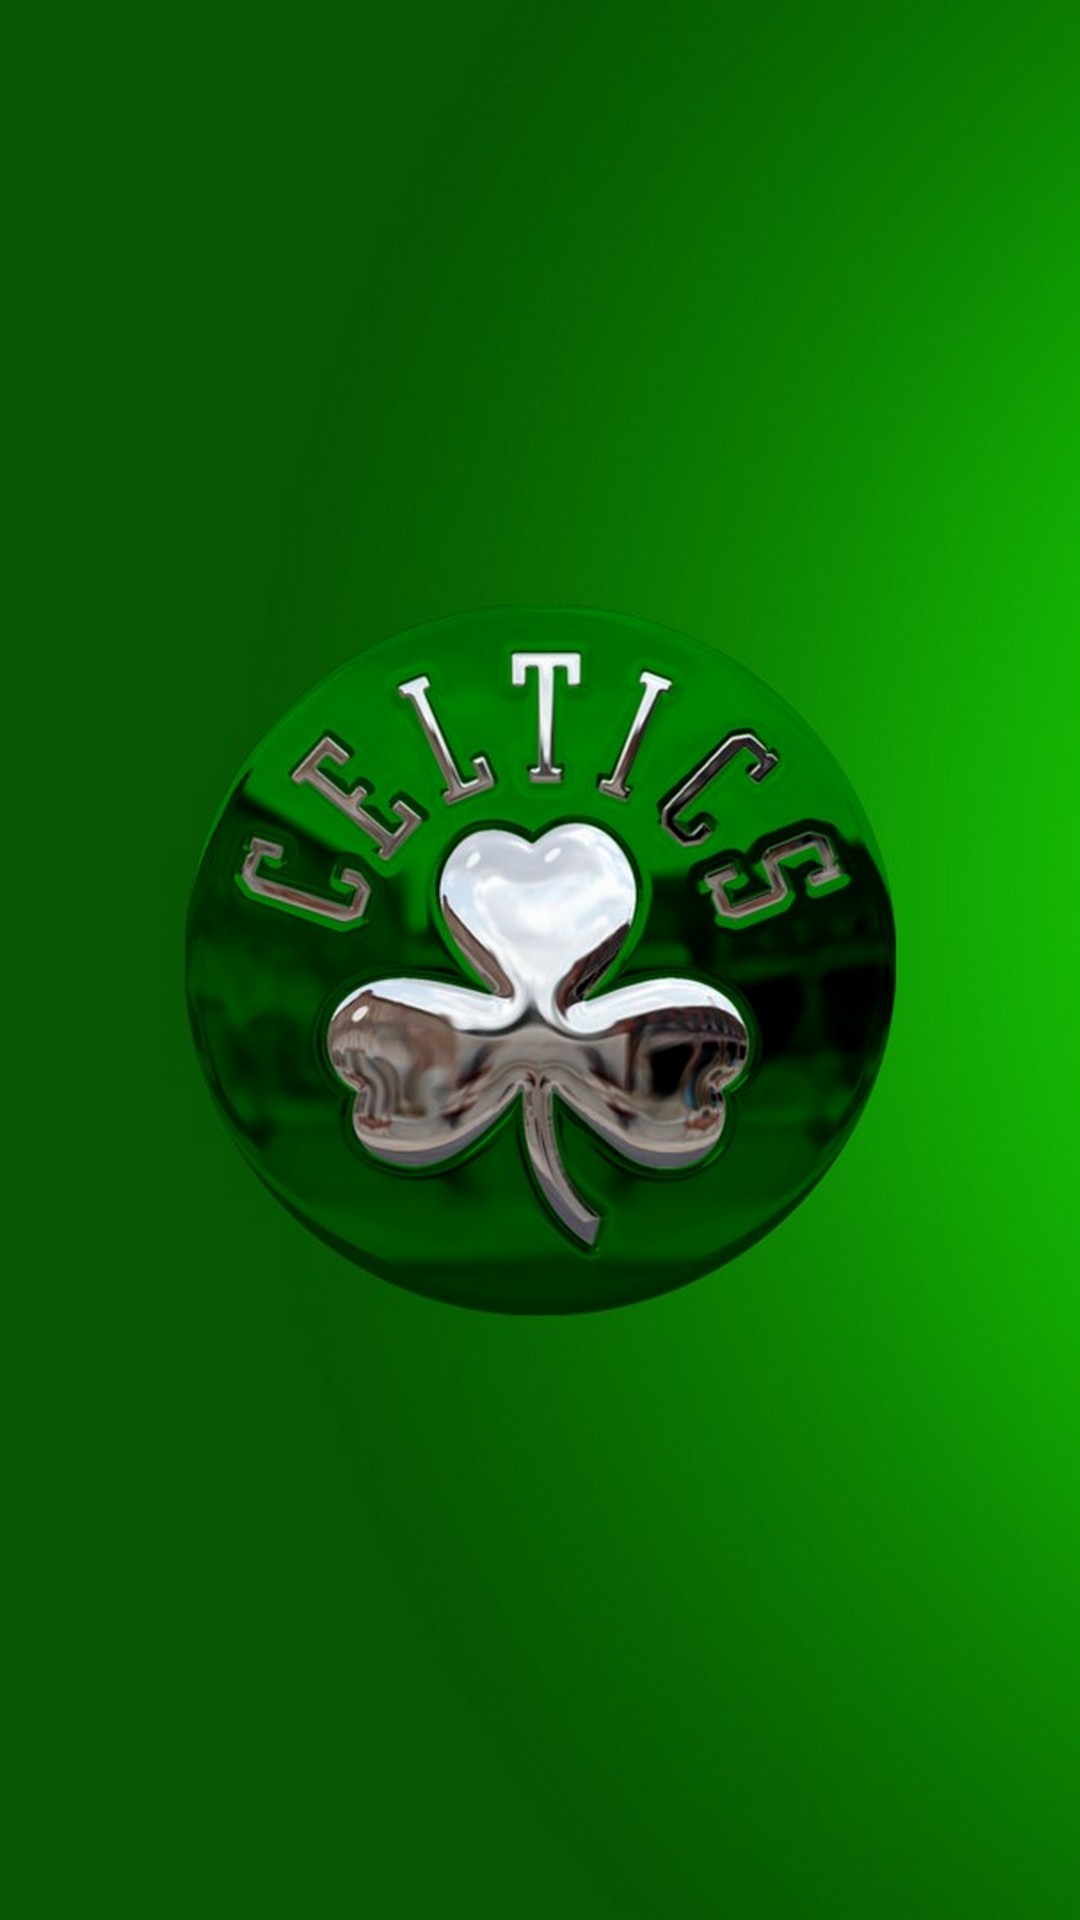 Boston Celtics Wallpaper For Android Android Wallpaper